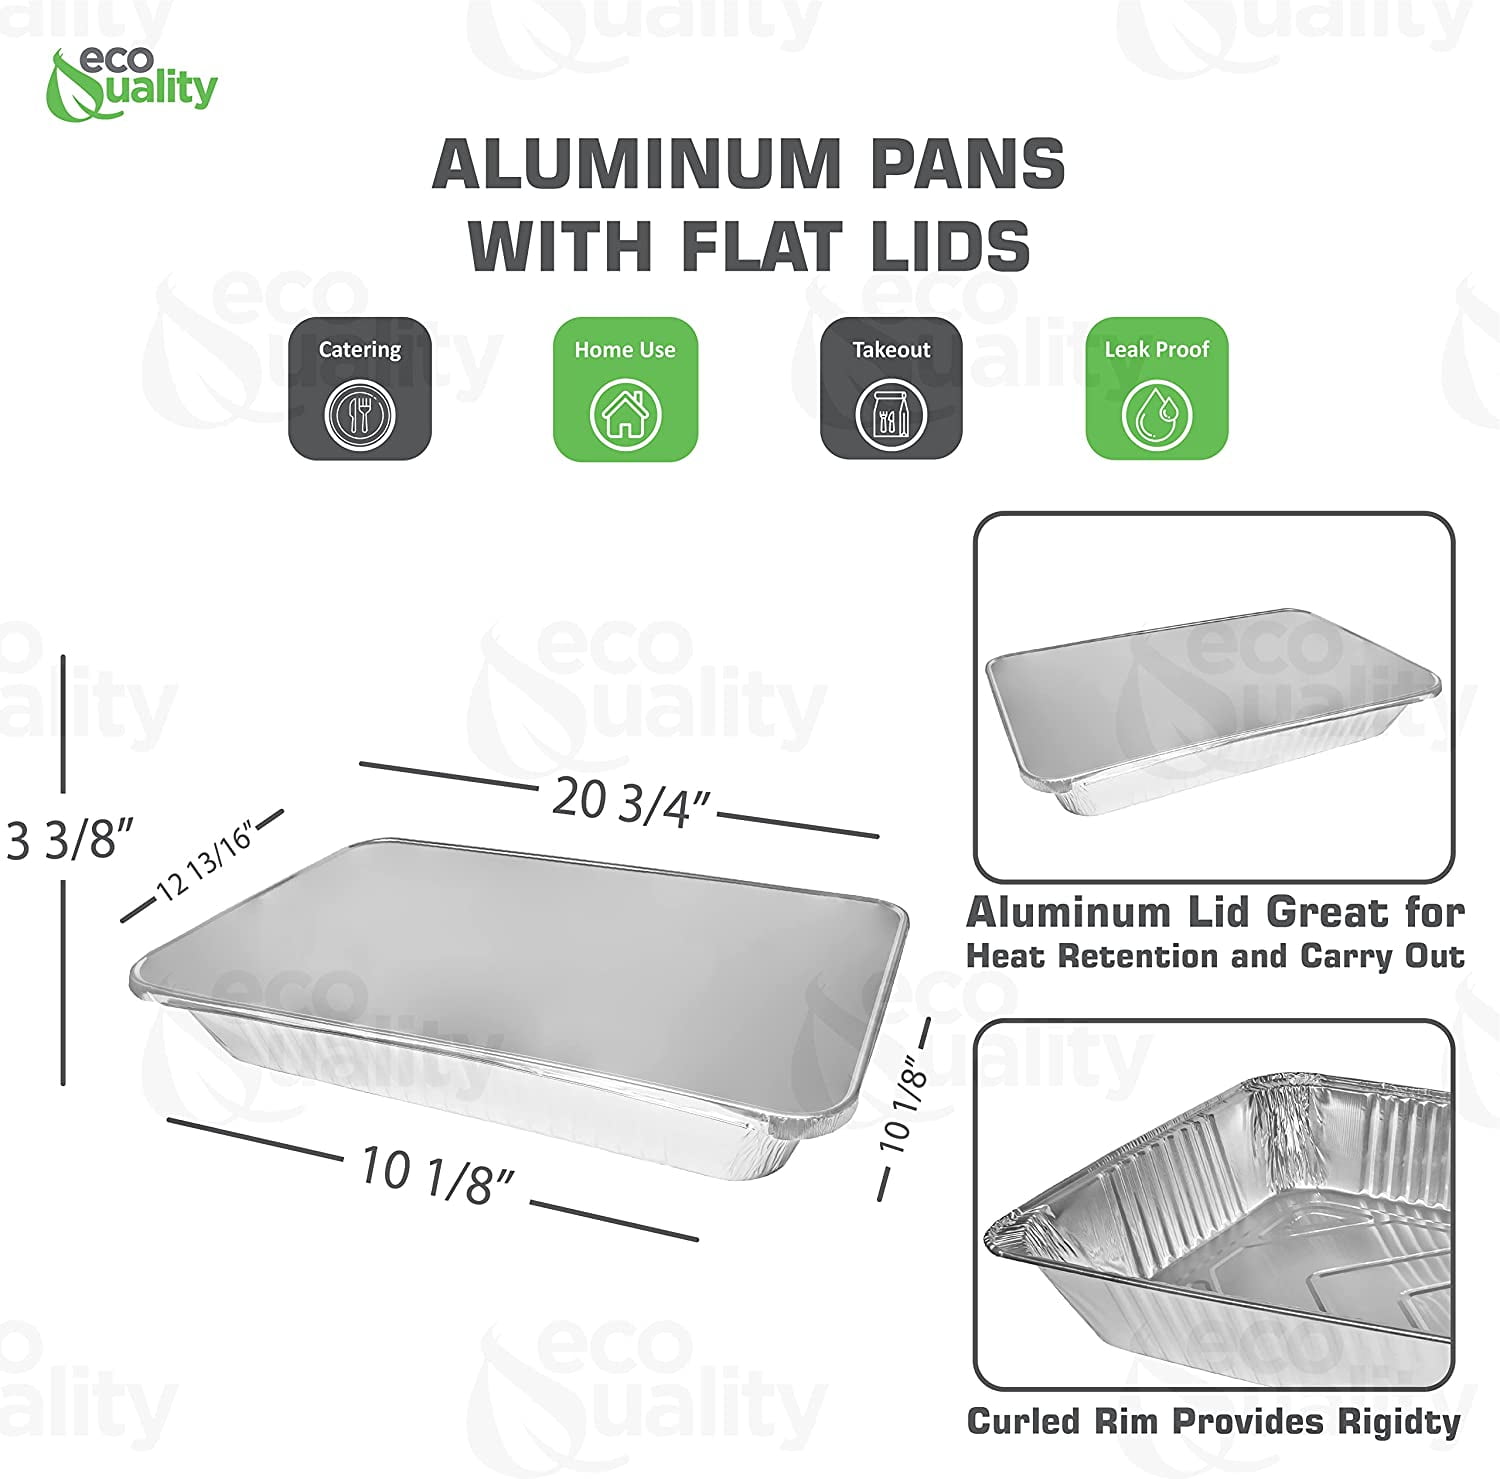 Aluminum Pans Full Size, Large Disposable Roasting & Baking Pan, 21x13  Deep Foil Pans (100 Pack) Extra Heavy Duty Chafing Trays for Hotels,  Restaurants, Caterers, Steam Table, Buffets & Bakeware - Yahoo